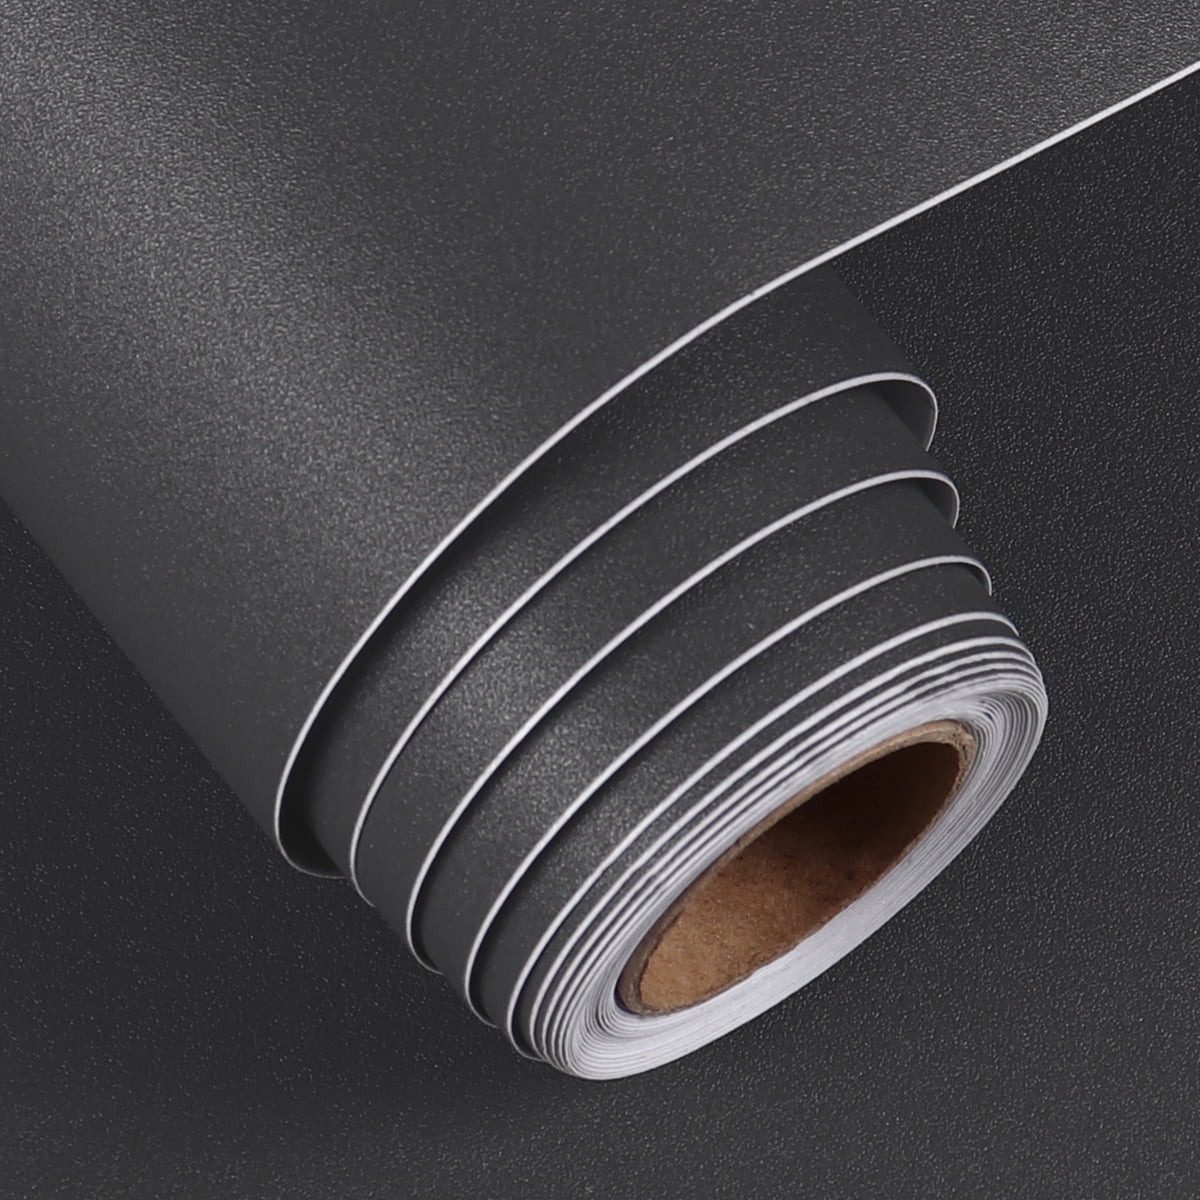 1 Roll Of Matte Black Contact Paper For Bedroom, Pvc Self-adhesive  Wallpaper, Removable, Ideal For Decorating Walls, Cabinet, Countertop And  Shelf